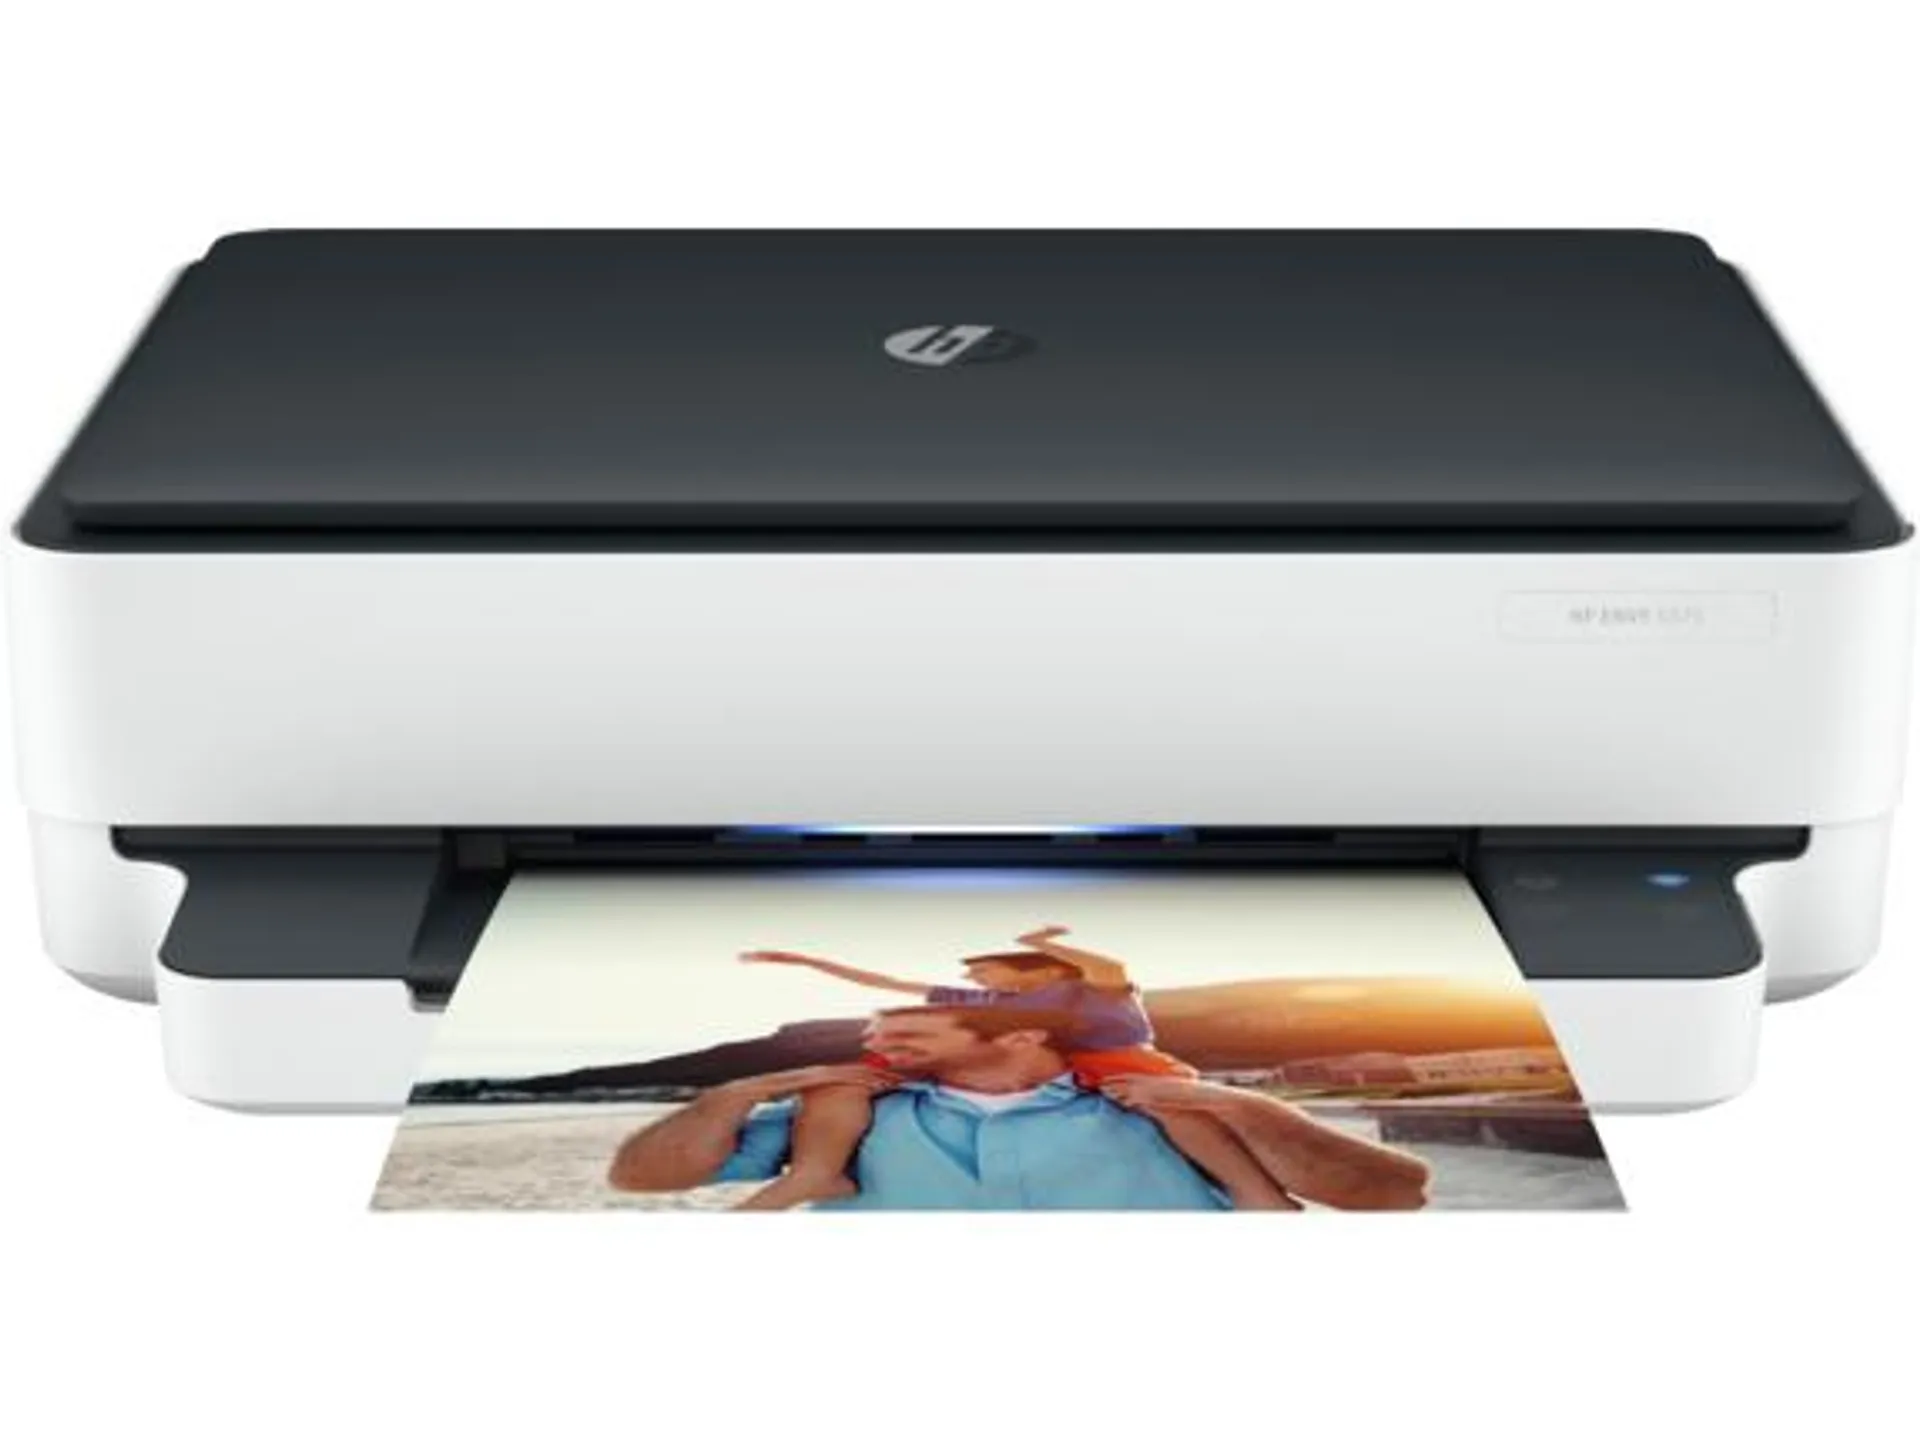 HP ENVY 6075 All-In-One Printer